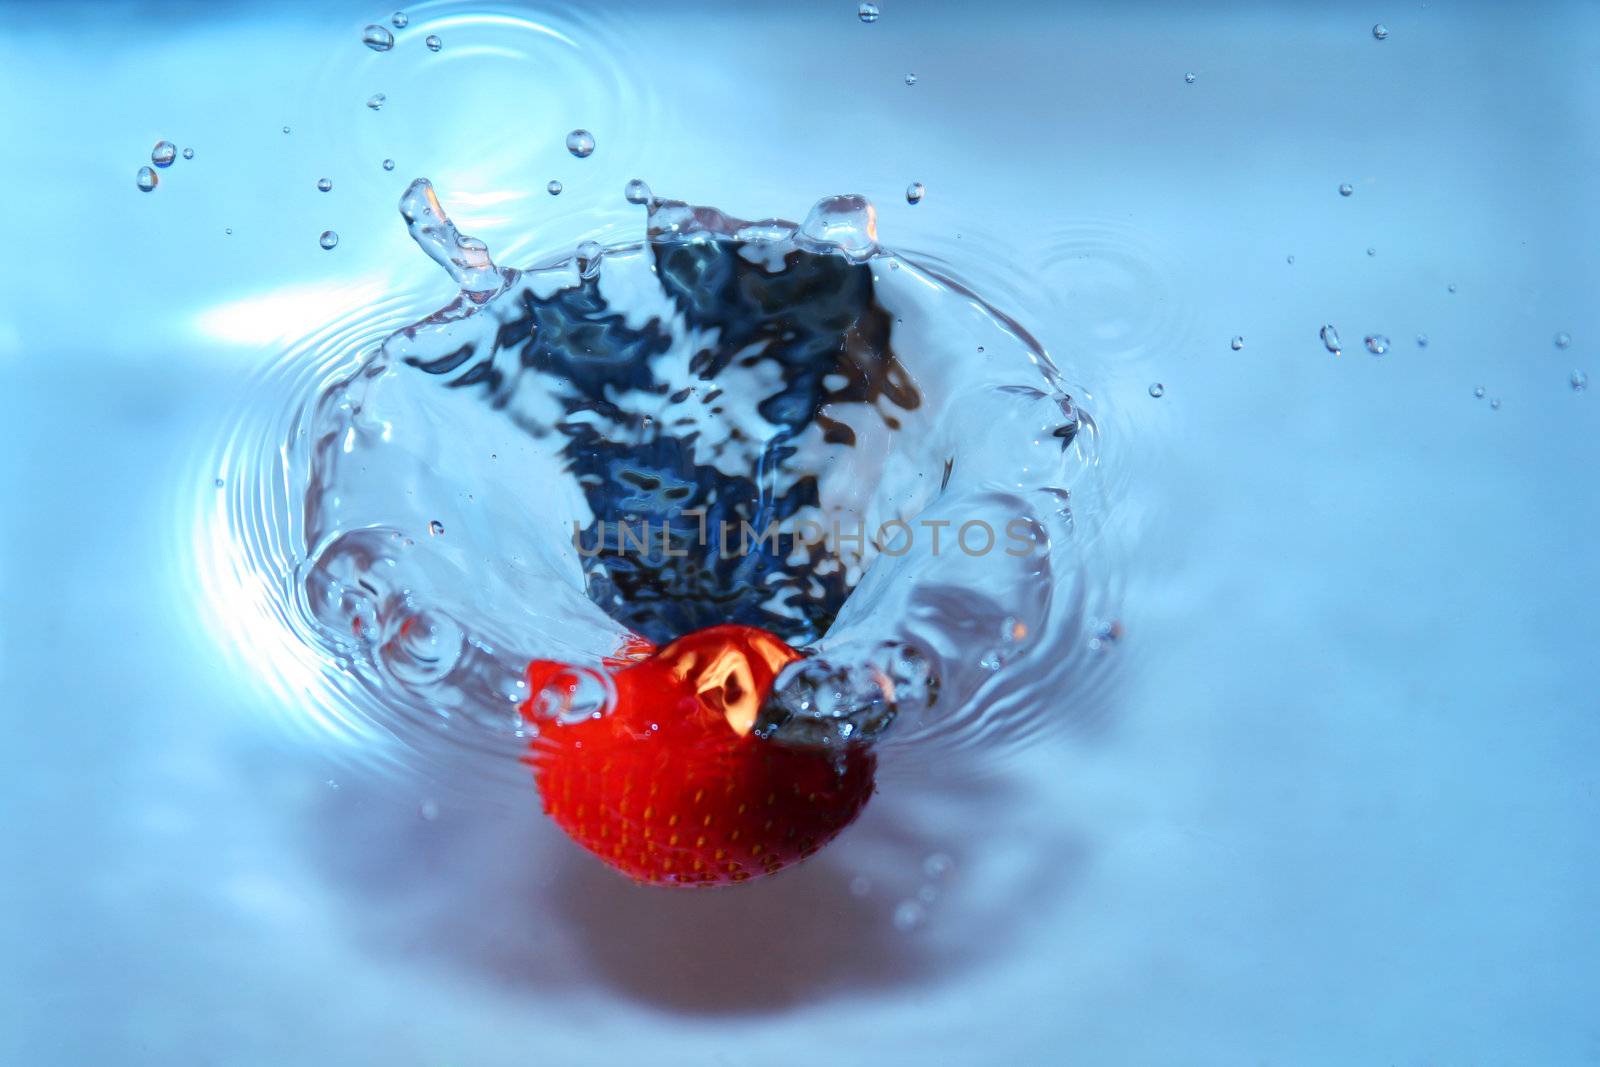 strawberry falling into water, splashing water. freshness and purity implied